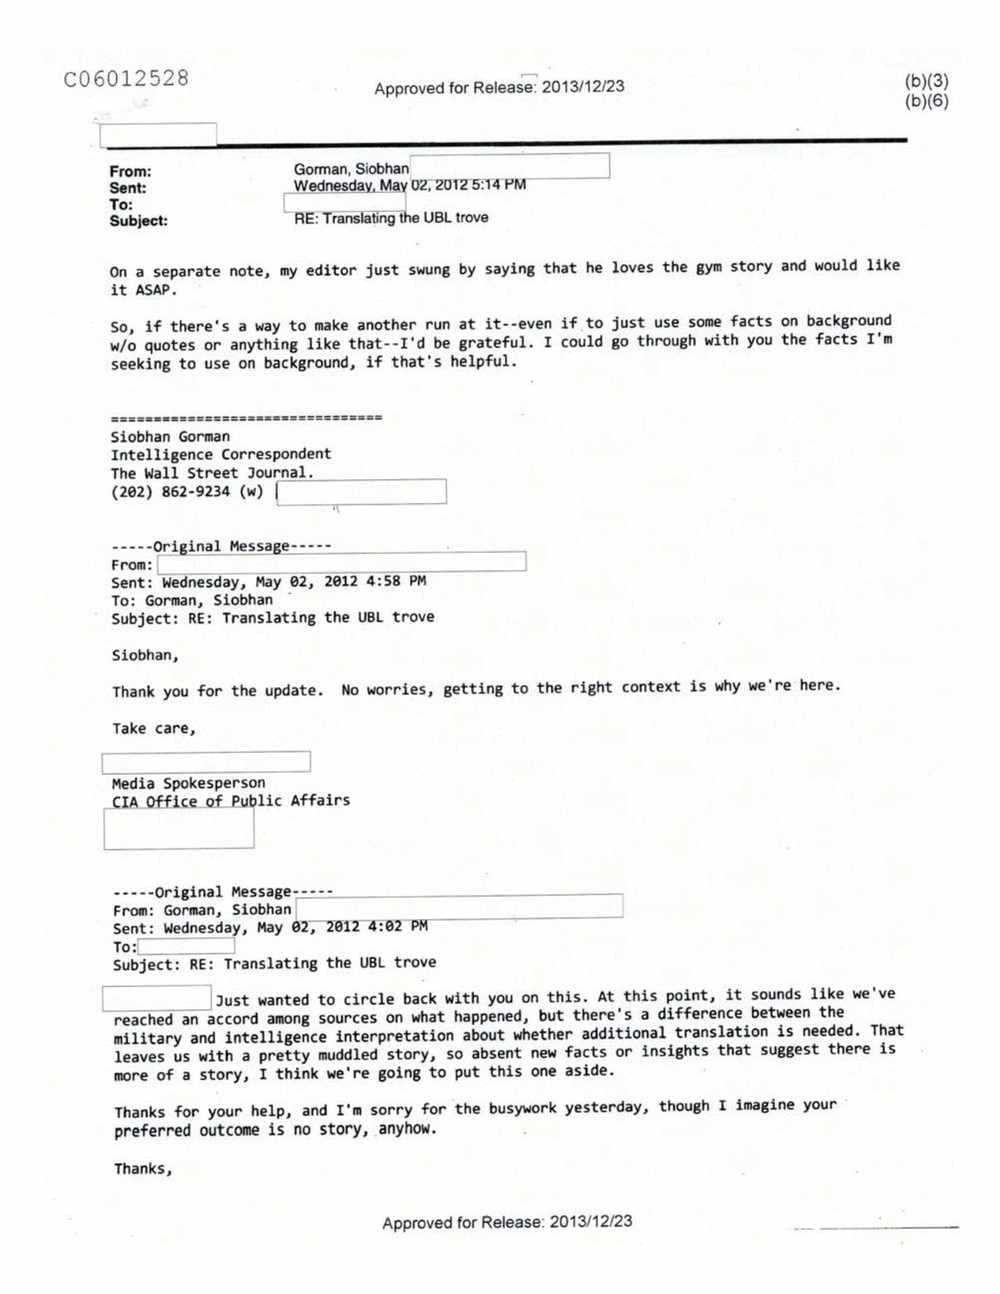 Page 53 from Email Correspondence Between Reporters and CIA Flacks